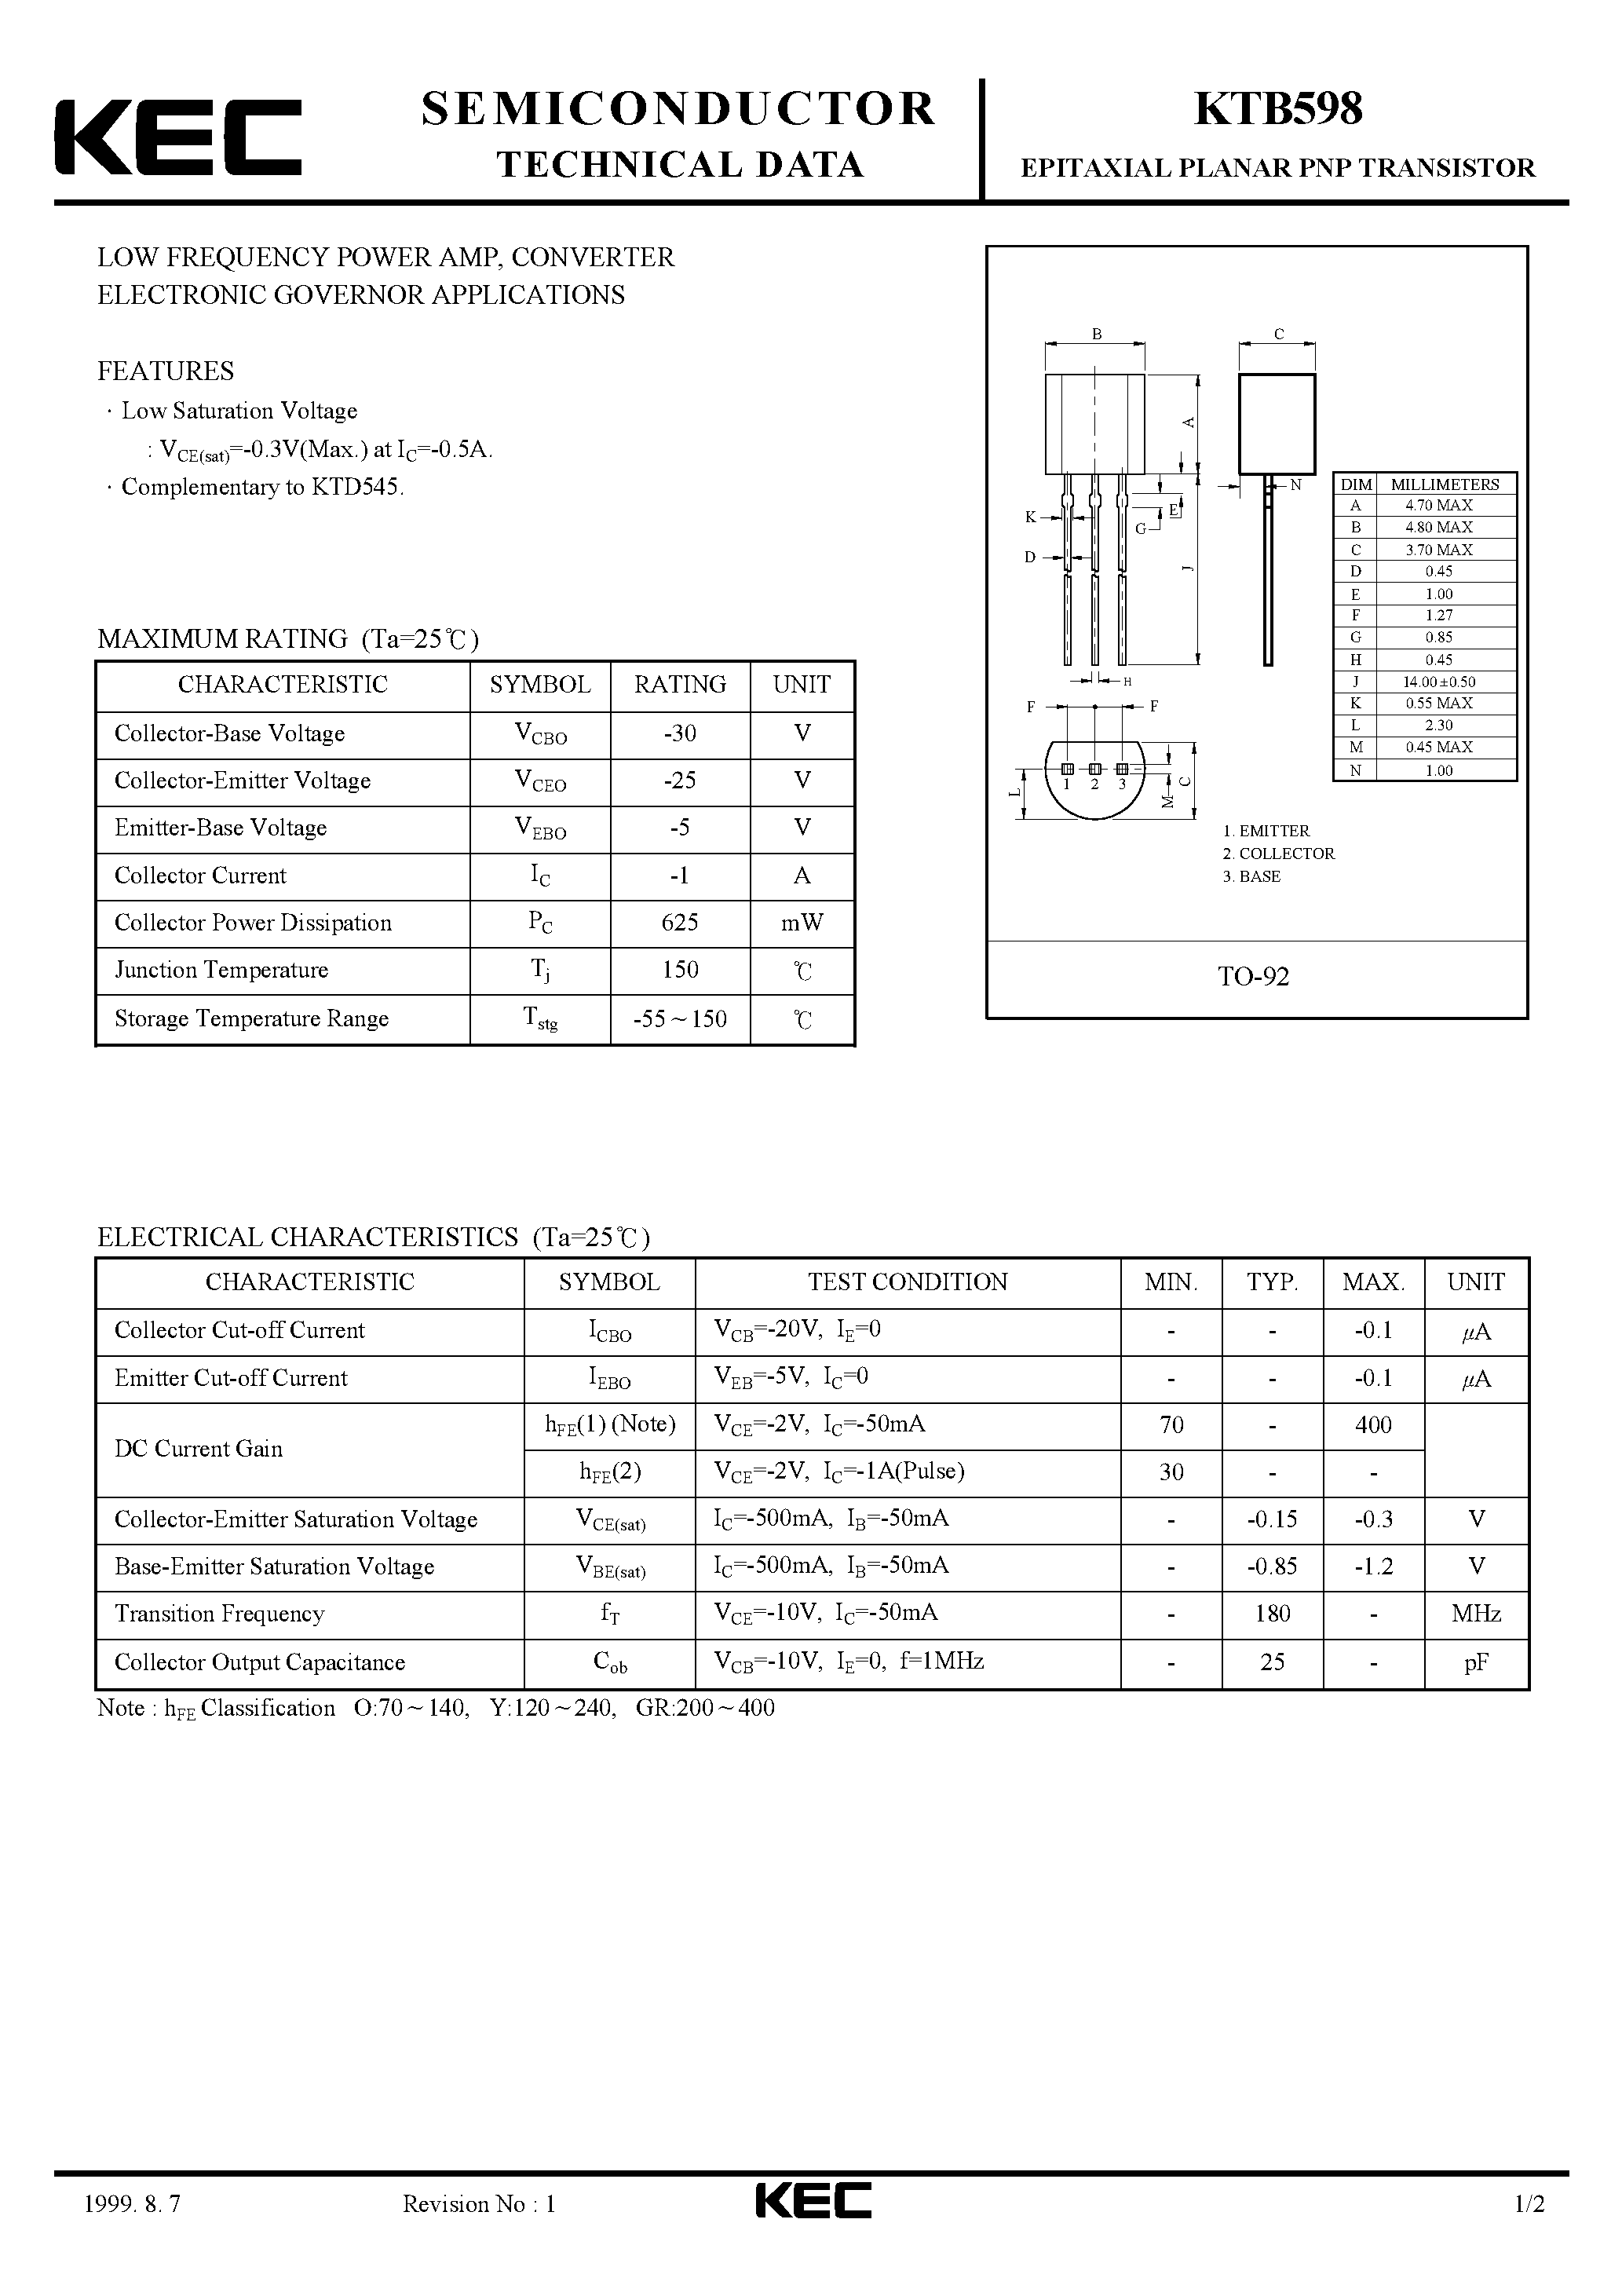 Datasheet KTB598 - EPITAXIAL PLANAR PNP TRANSISTOR (LOW FREQUENCY POWER AMP/ CONVERTER ELECTRONIC GOVERNOR) page 1